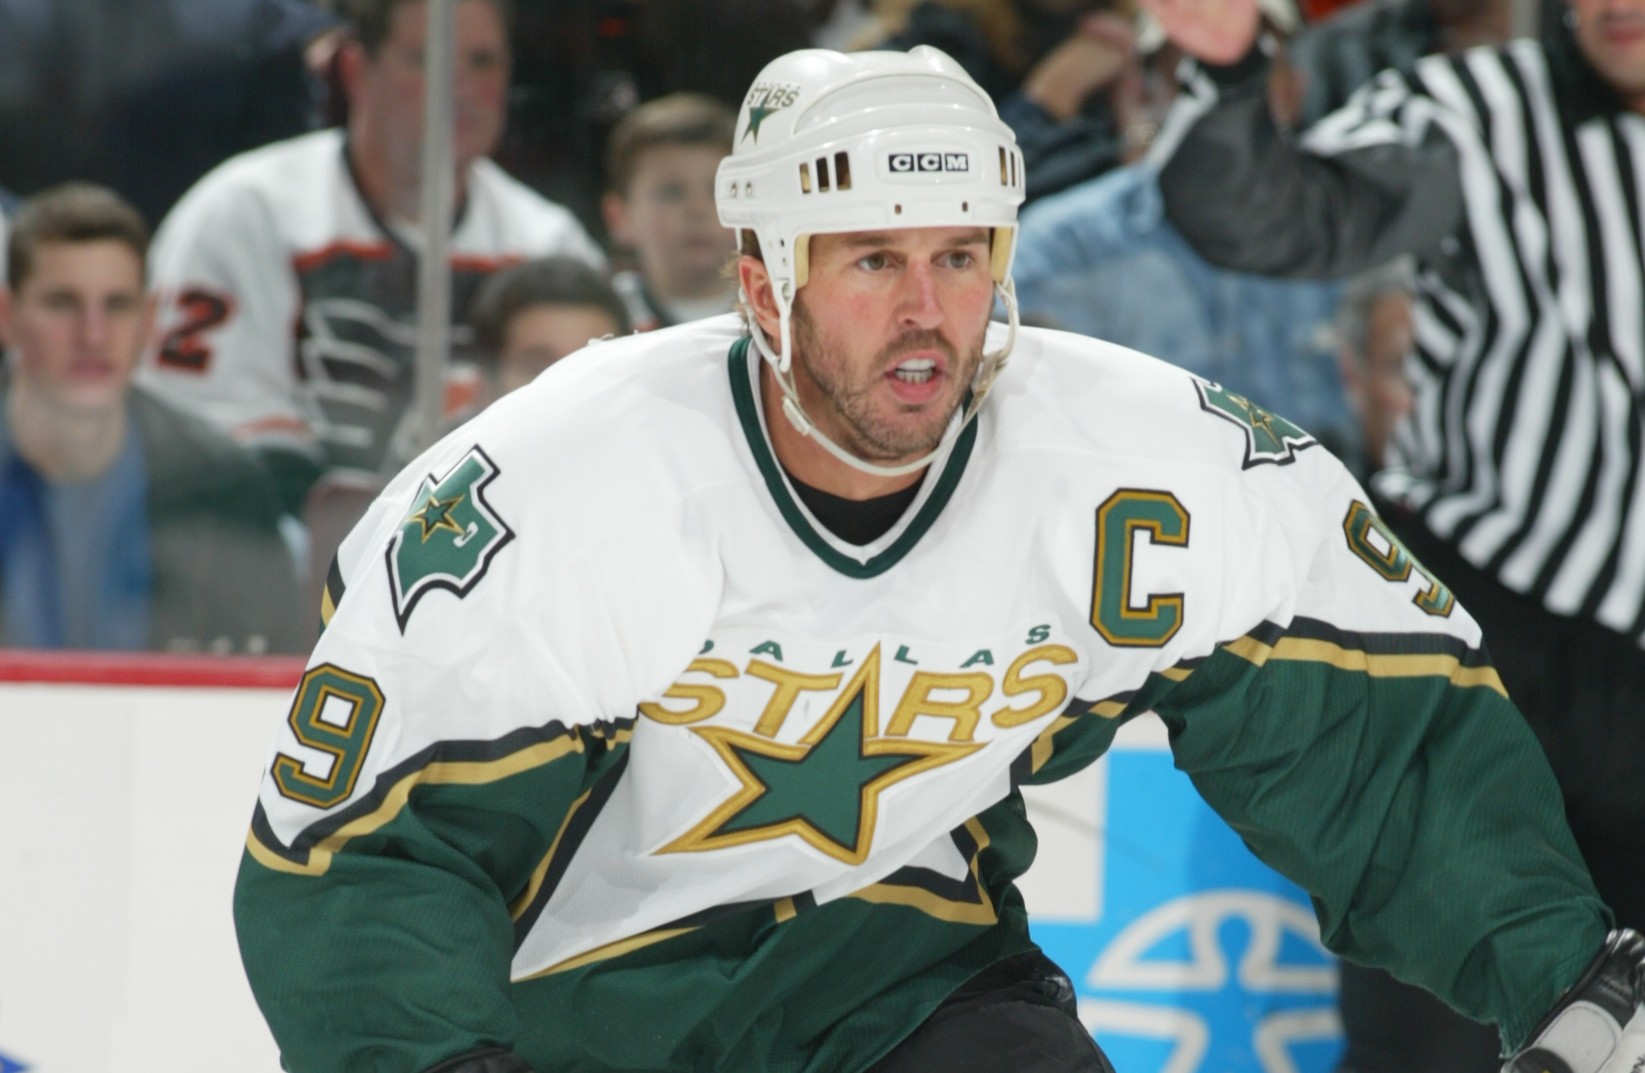 Mike Modano and Willa Ford divorce: Ice hockey legend and wife